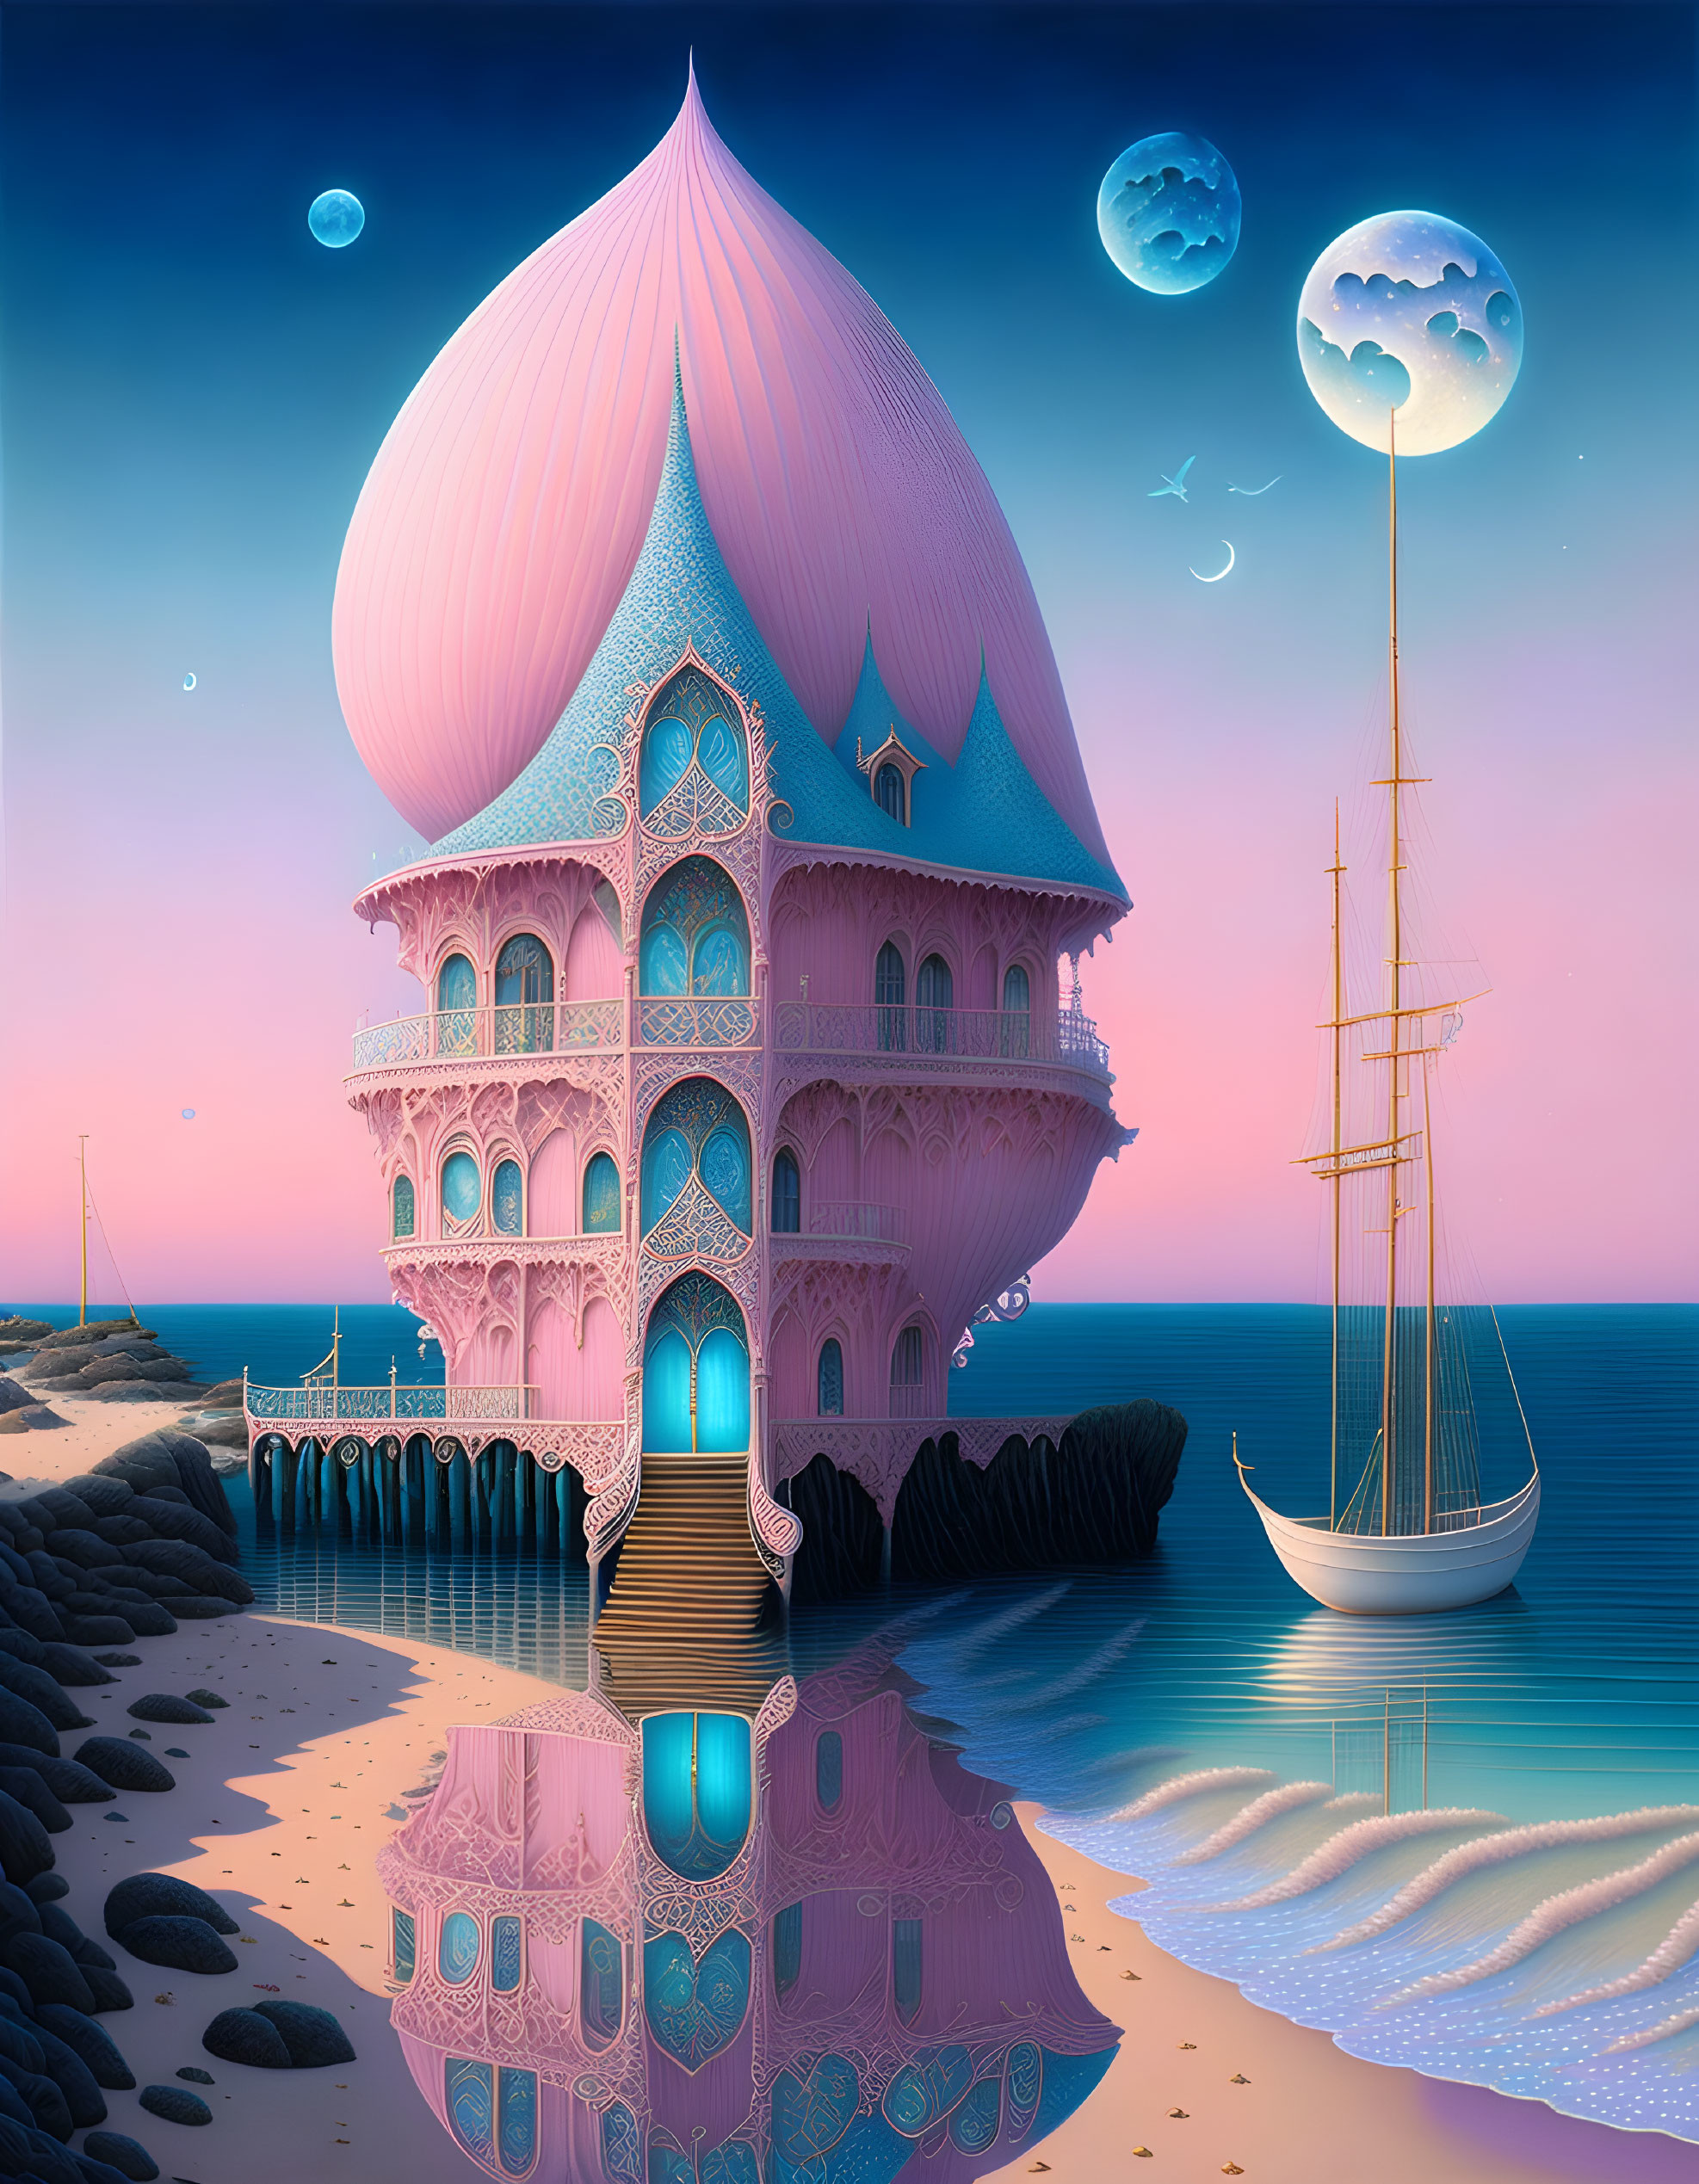 Pink palace with domed roof by serene shore at dusk with sailboat and multiple moons in pastel